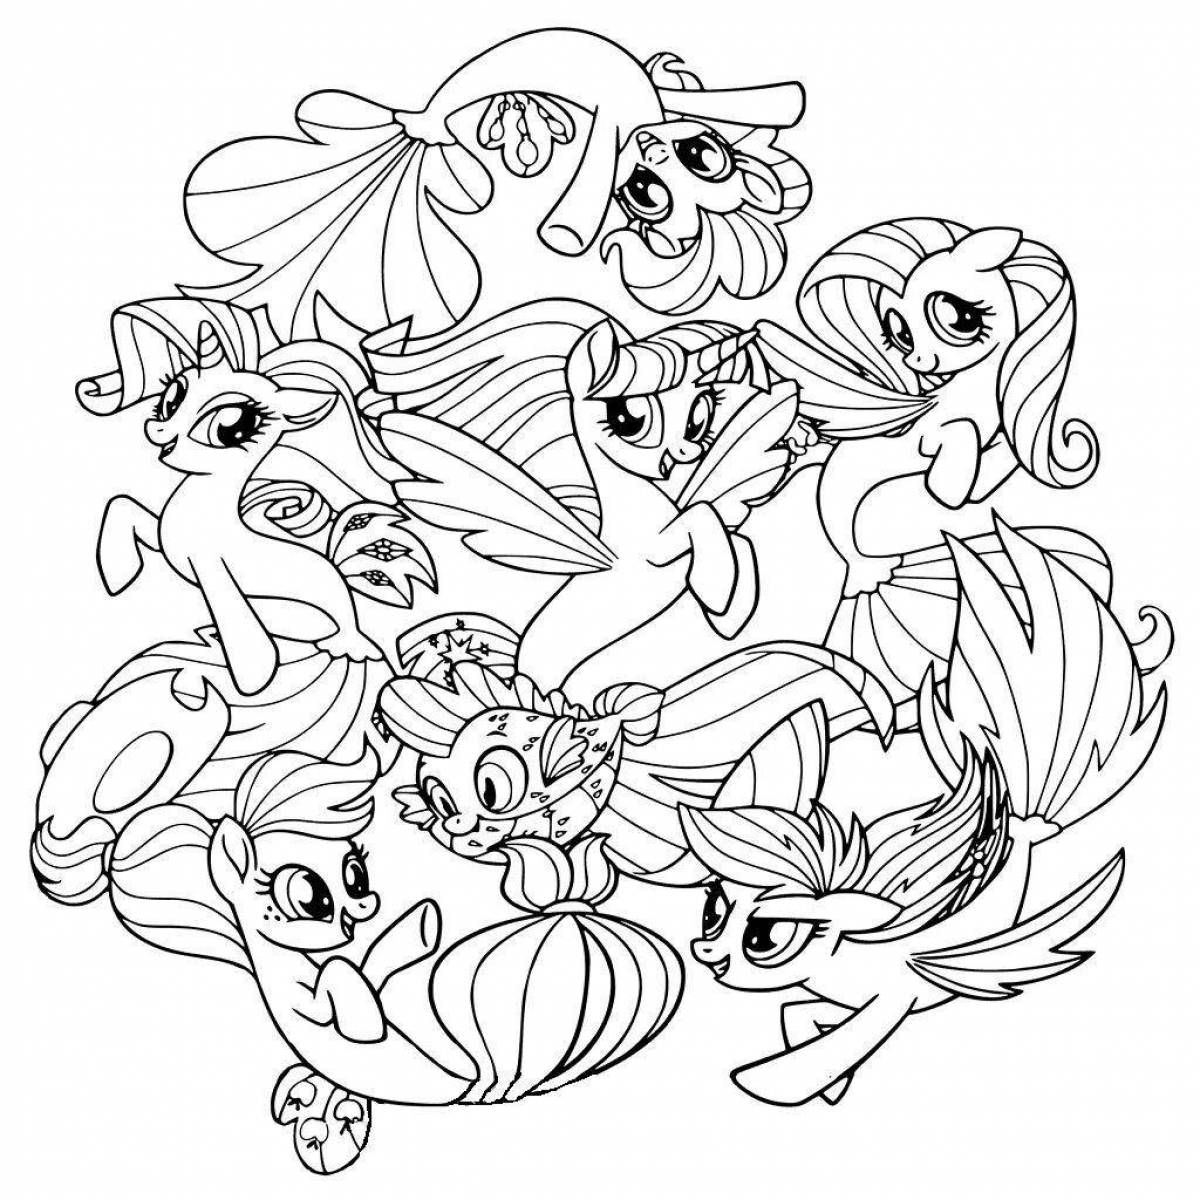 Exquisite my little pony coloring all together